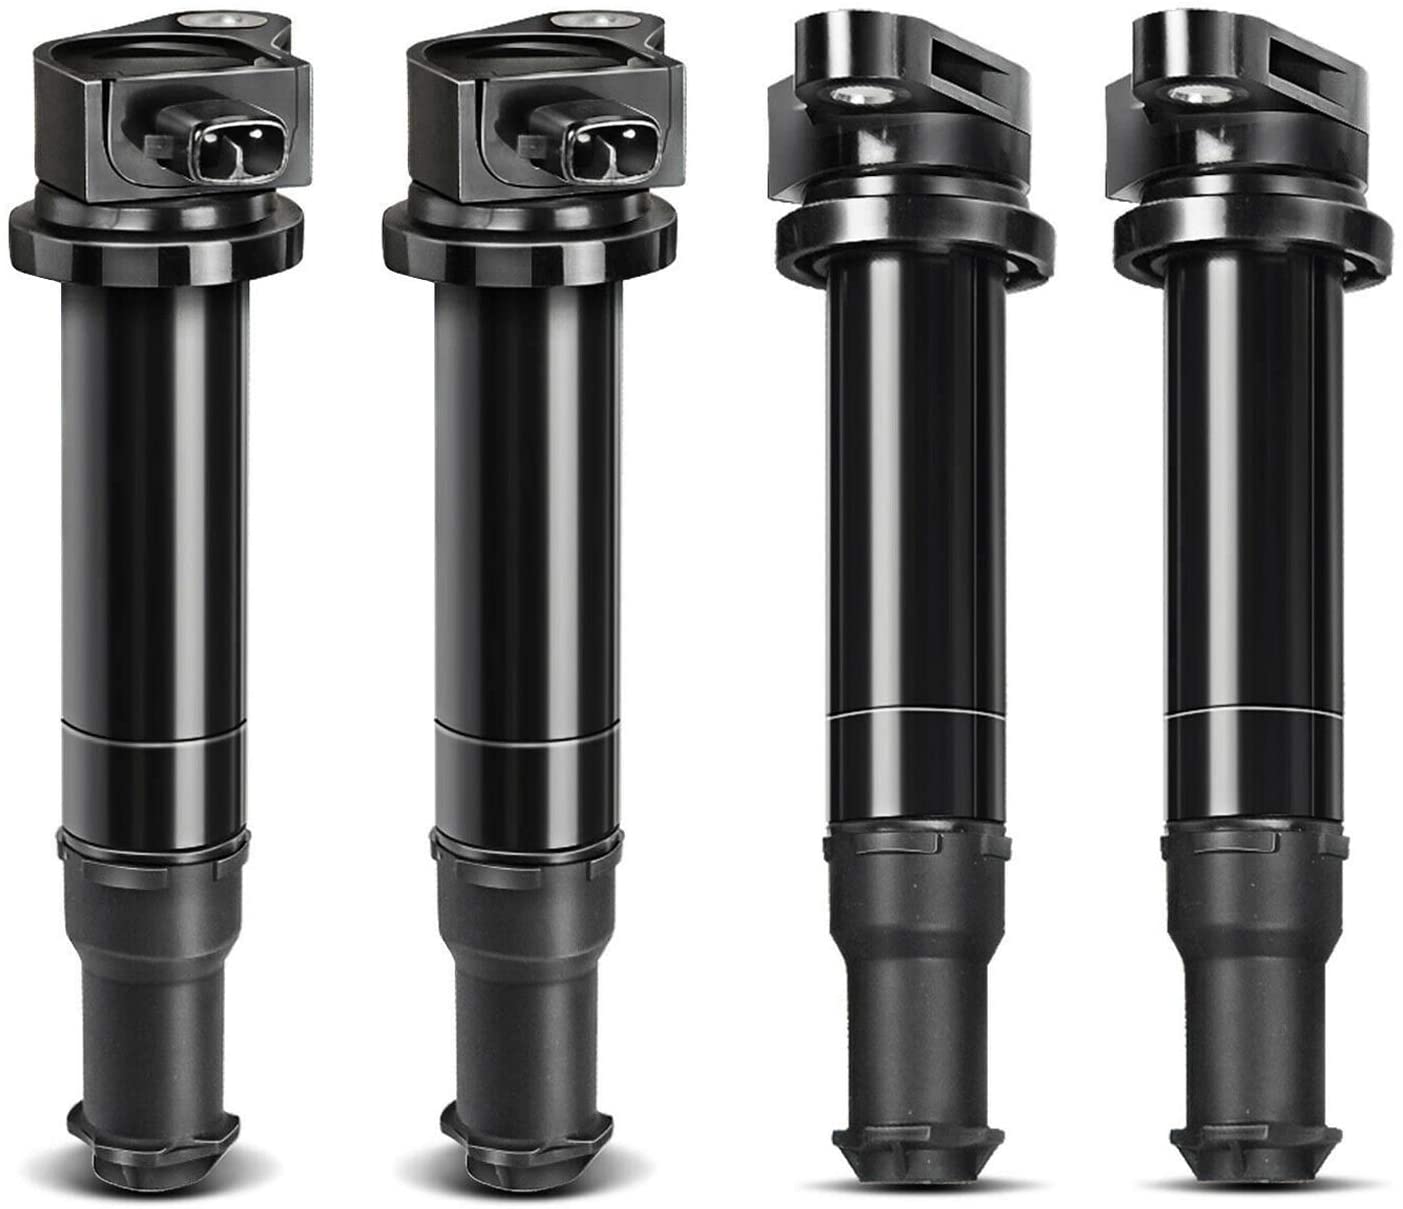 A-Premium Ignition Coils Pack Replacement for Hyundai Accent Kia Rio Rio5 2006-2011 1.6L Compatible UF499 27301-26640 C1543 (4-PC Set) (Pack of 4)